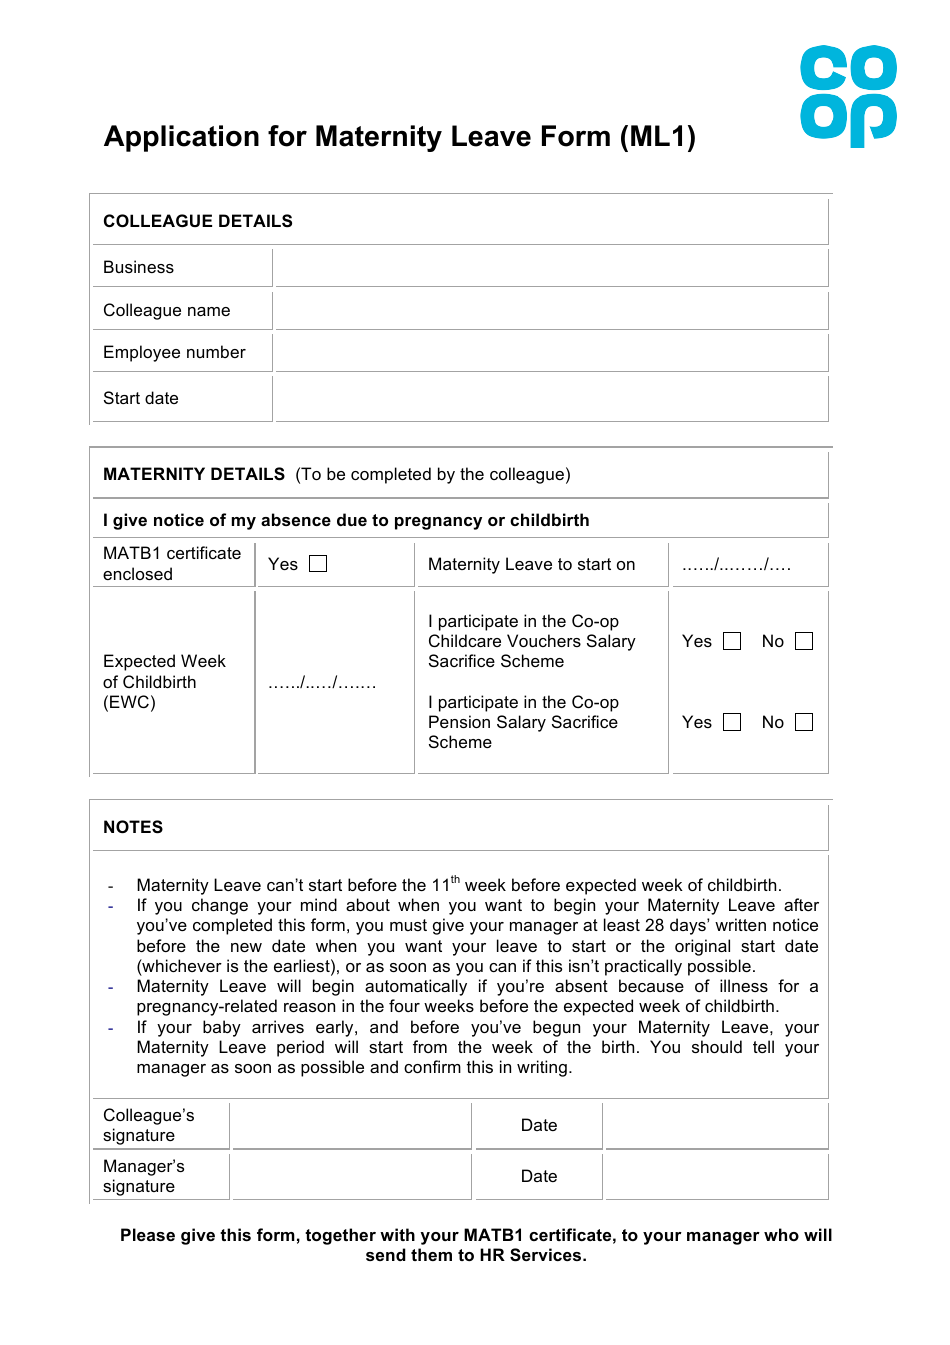 application-for-maternity-leave-form-co-op-fill-out-sign-online